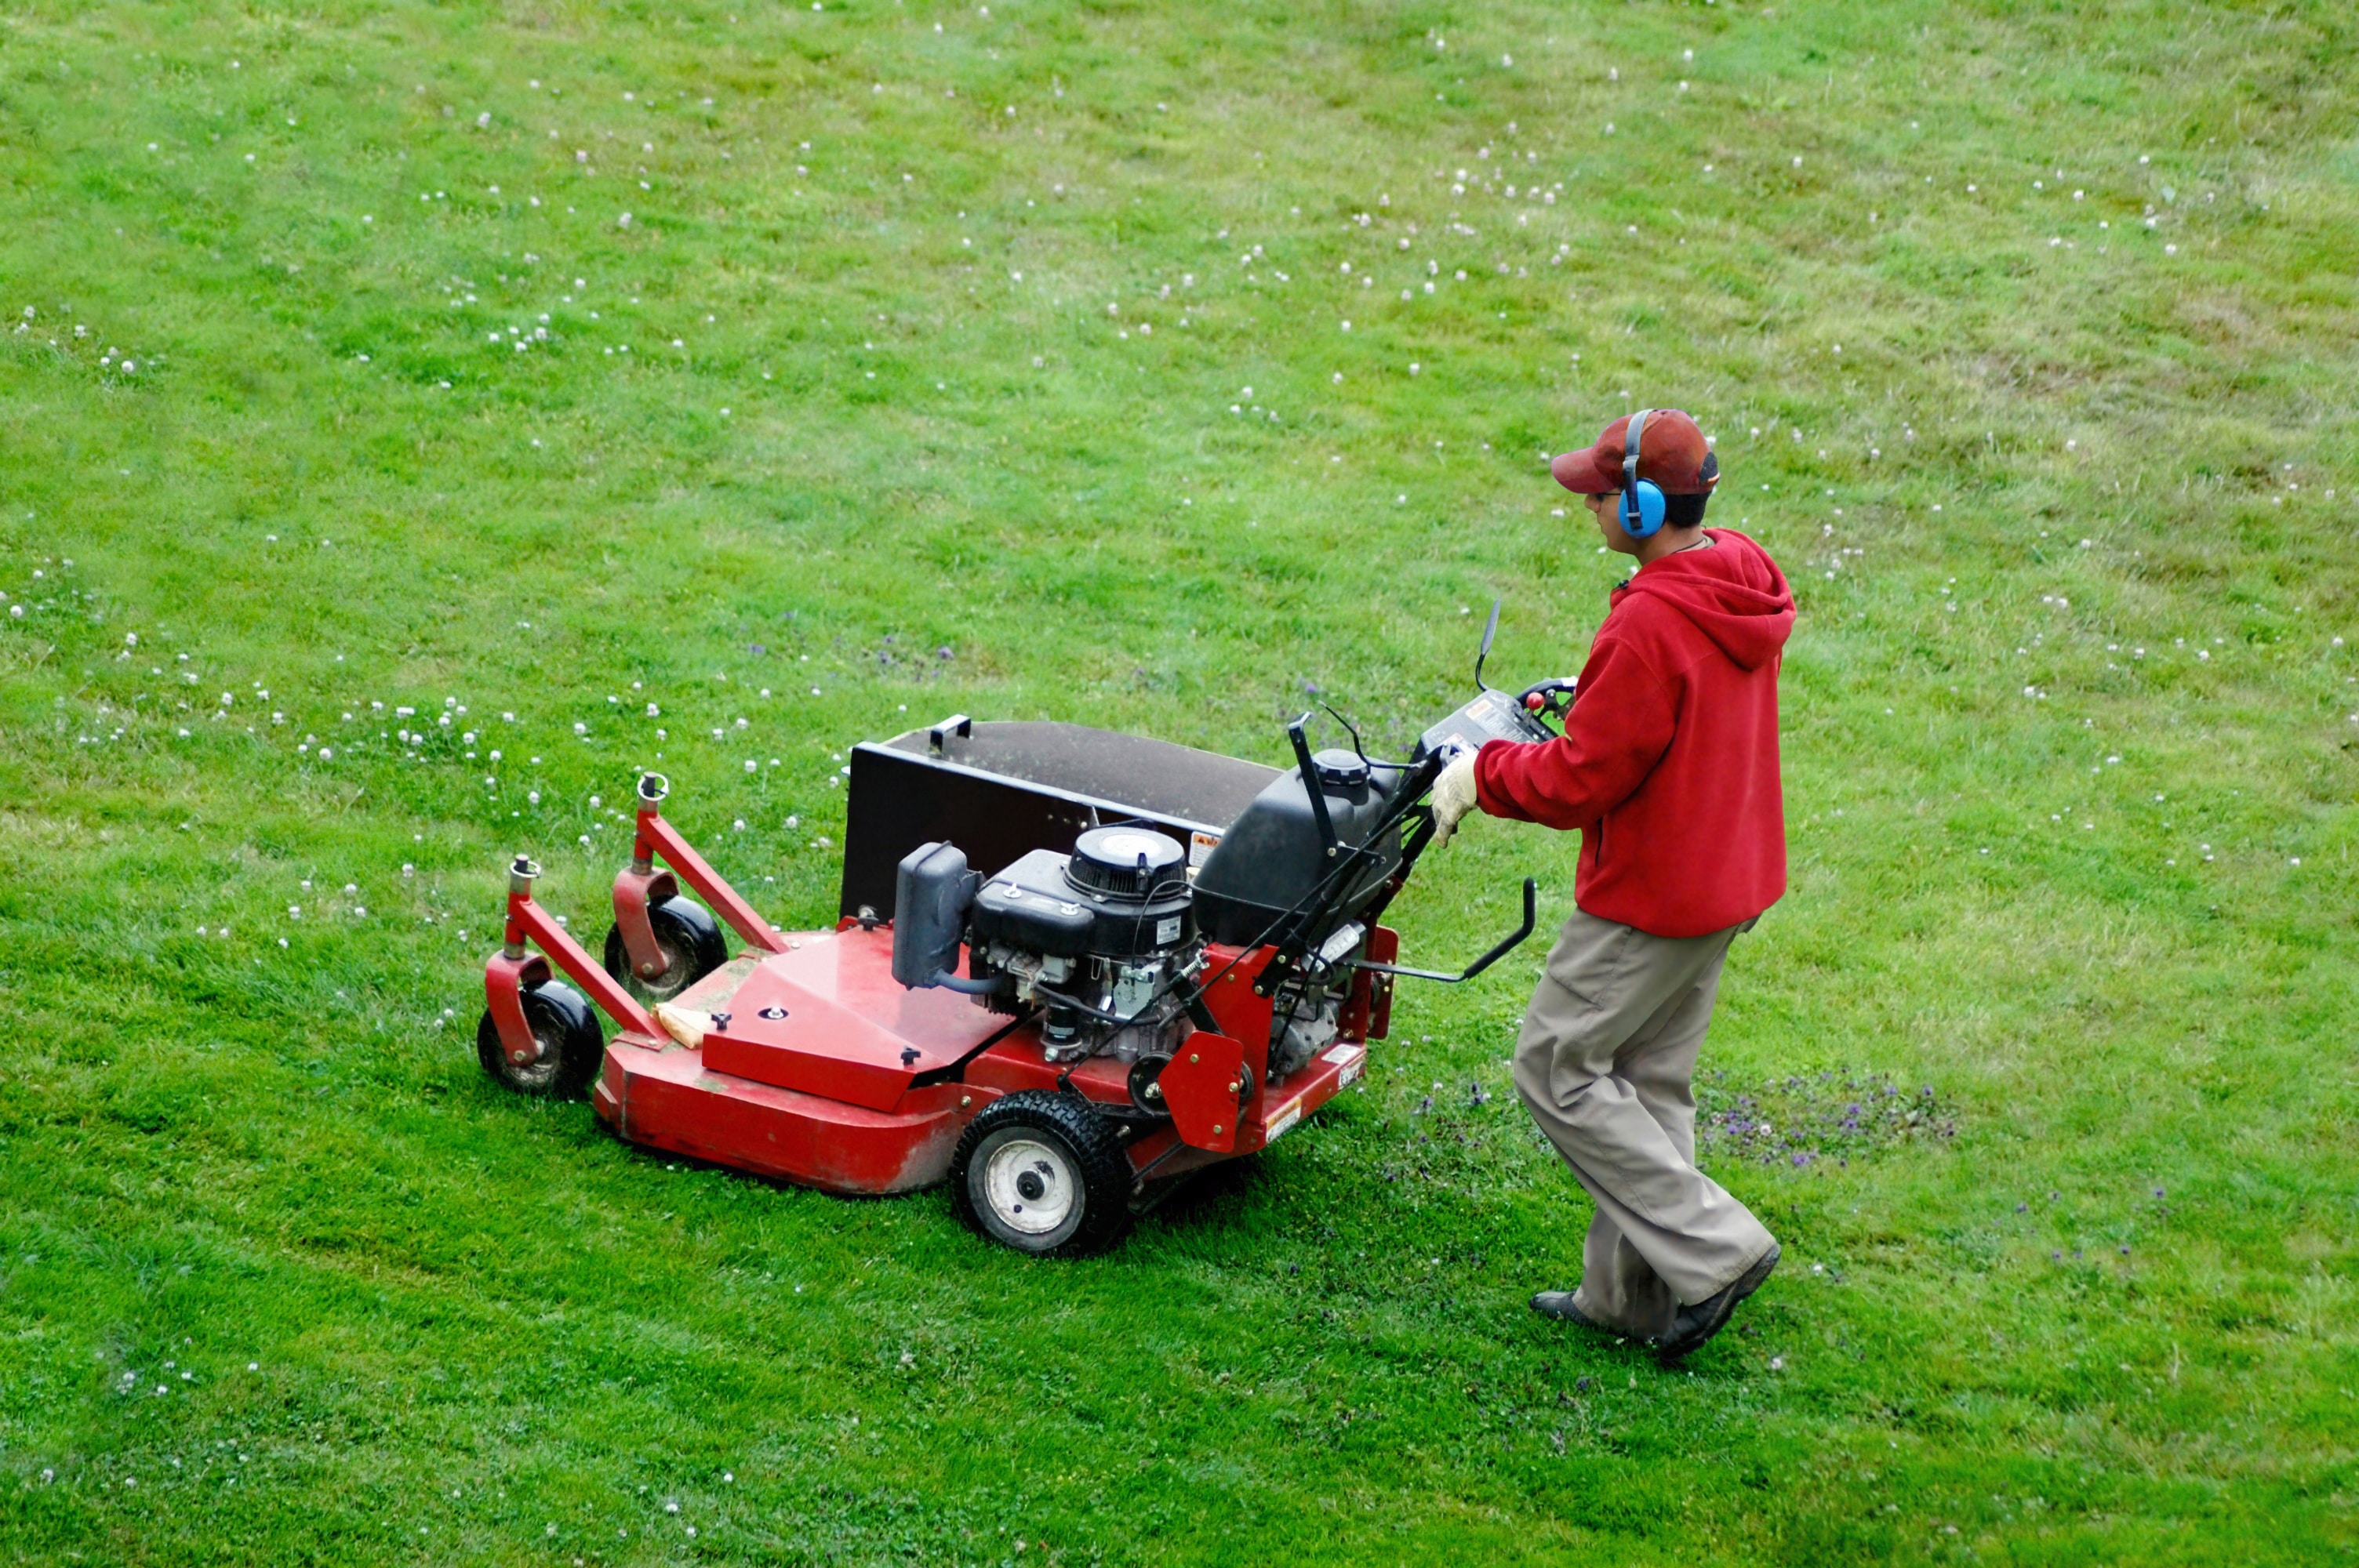 Don’t Fall For These 3 Common Lawn Care Myths